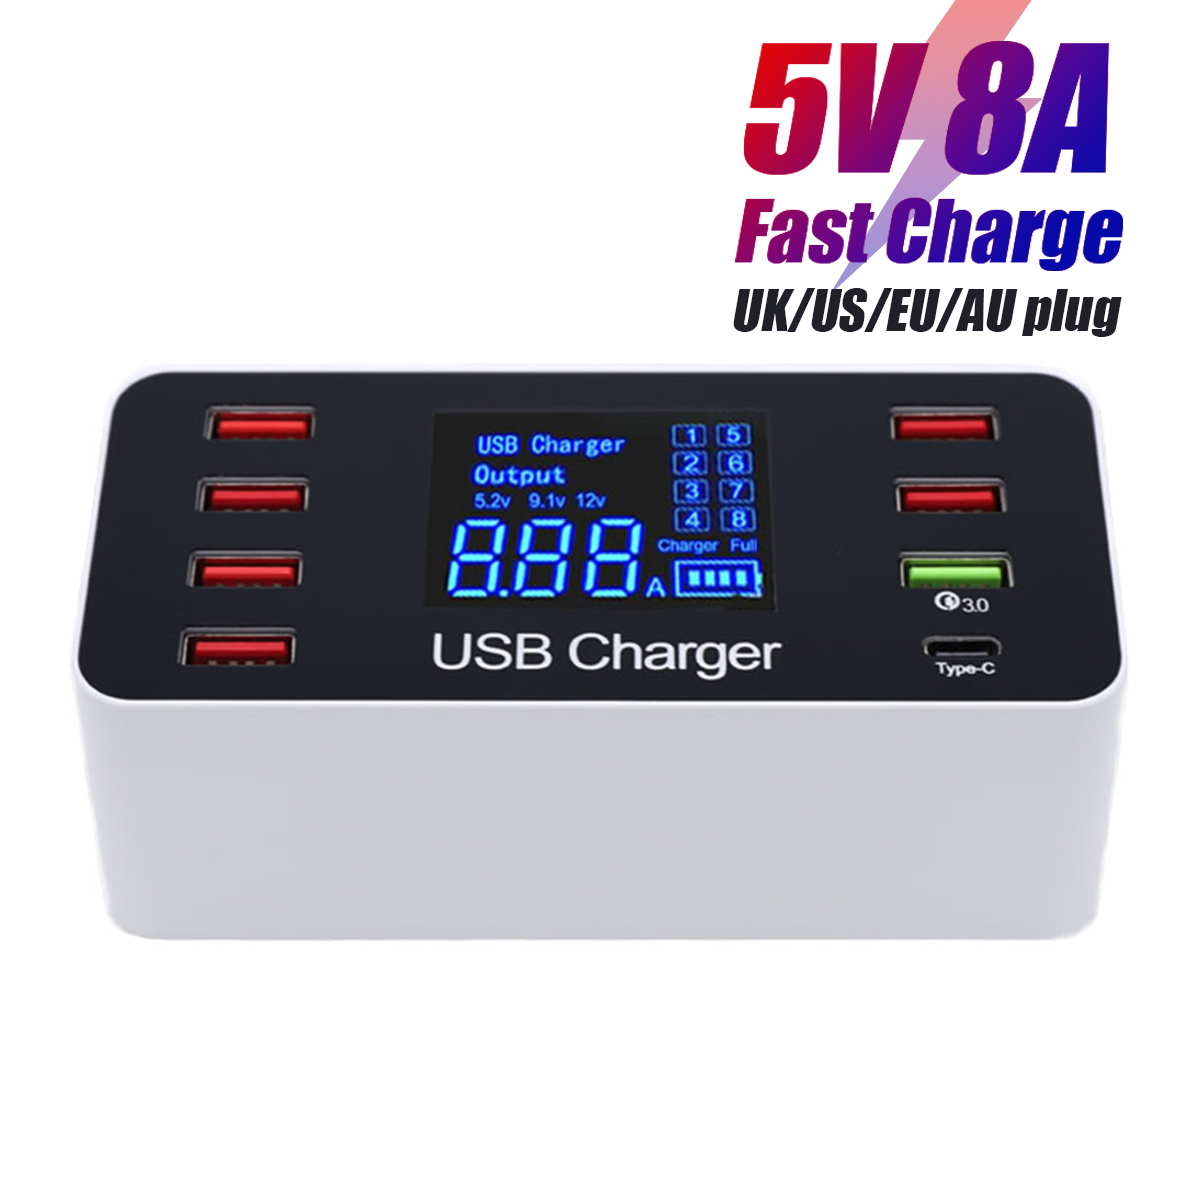 5V8A-Multiple-USB-Charger-Adapter-Desktop-Charging-Station-Hub-Type-C-Quick-Charge-30-Multi-Port-LCD-1606214-3